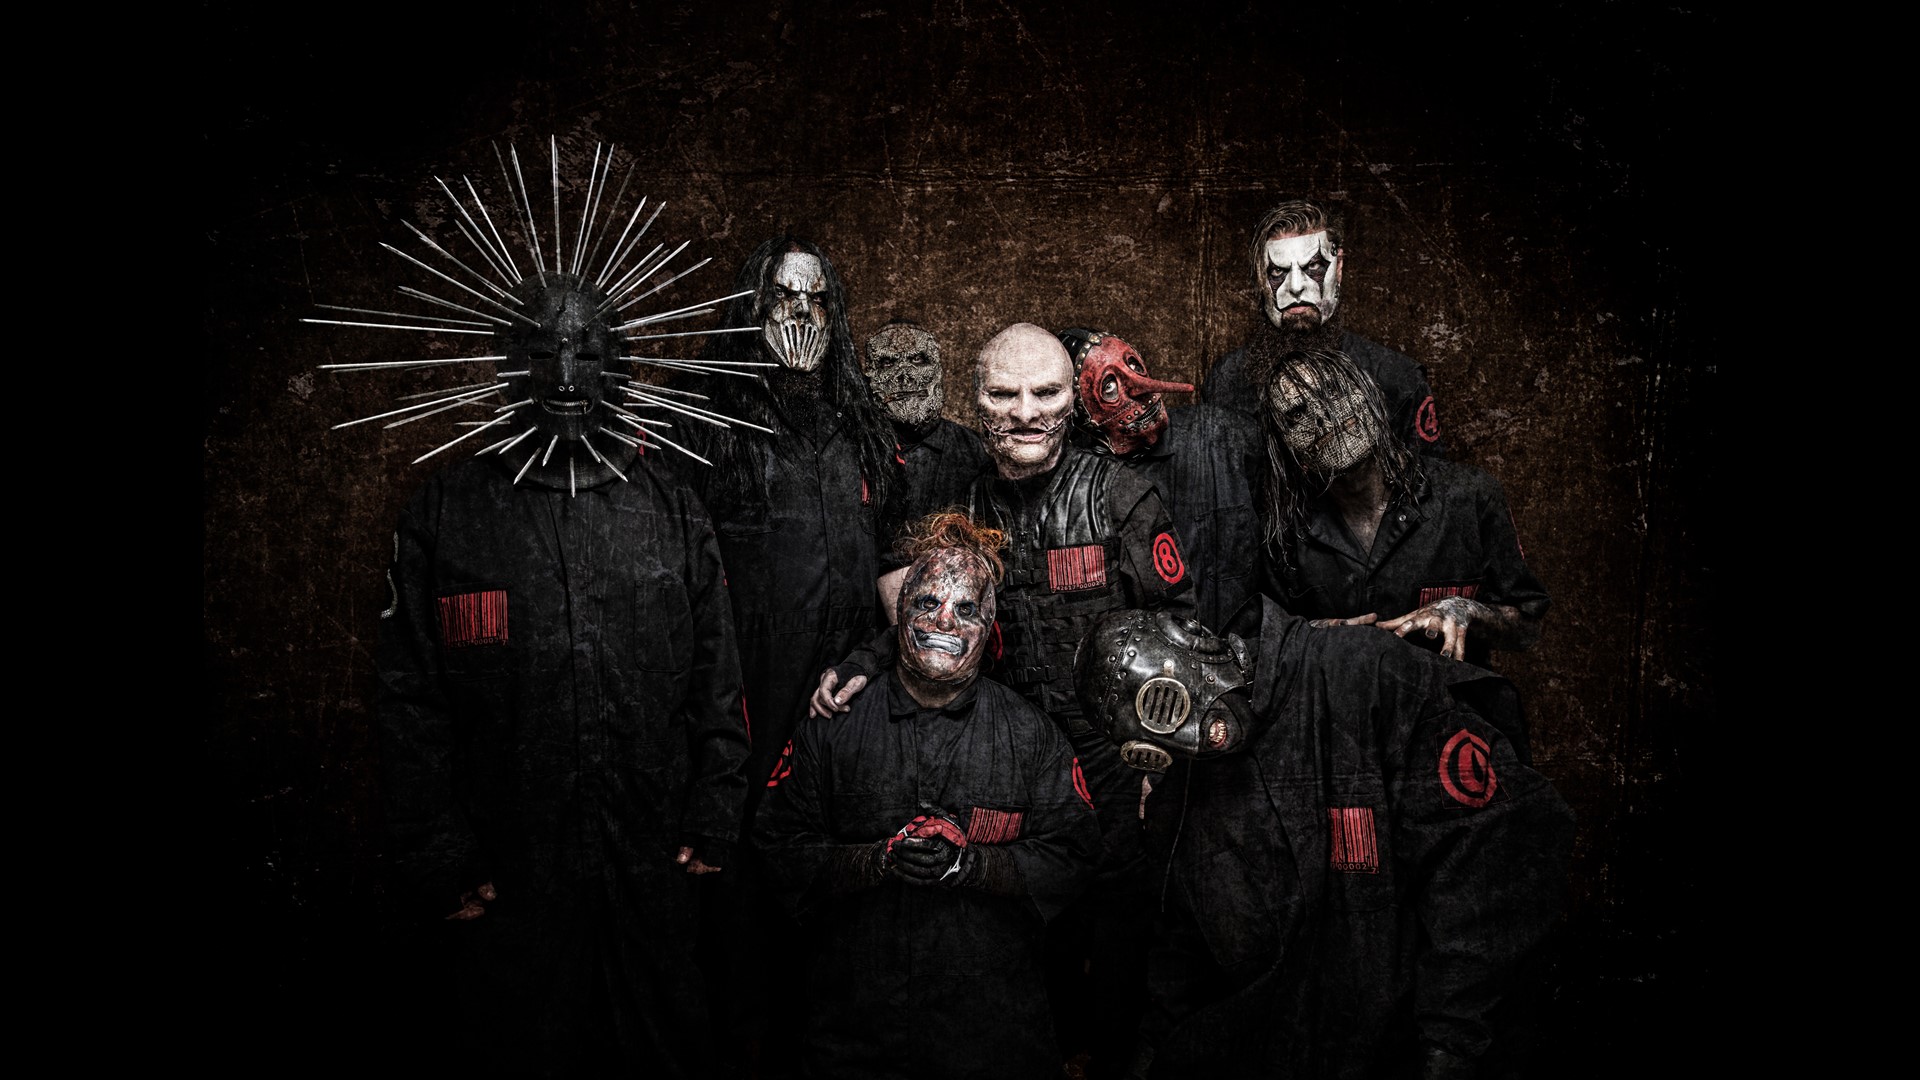 25 years after the Des Moines-grown band released its self-titled album, Slipknot returns to central Iowa with its metal music festival.